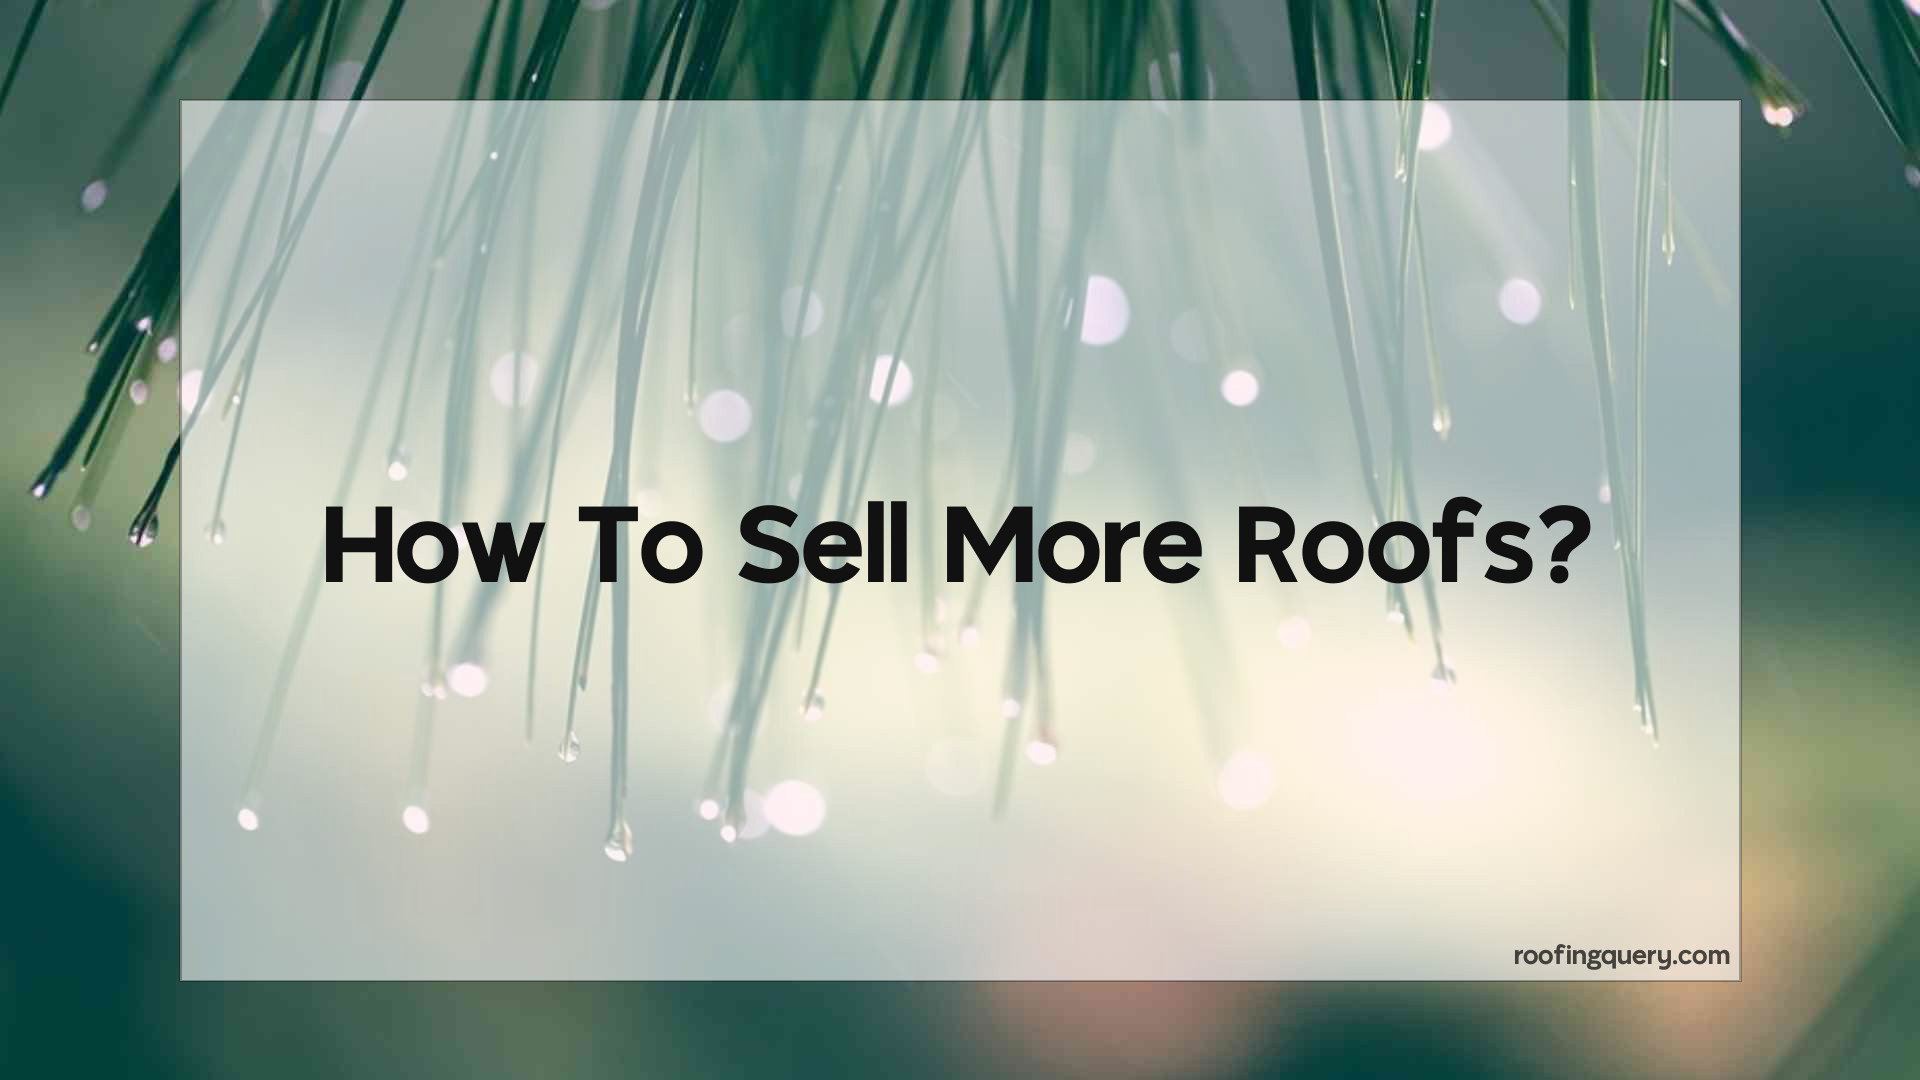 How To Sell More Roofs?